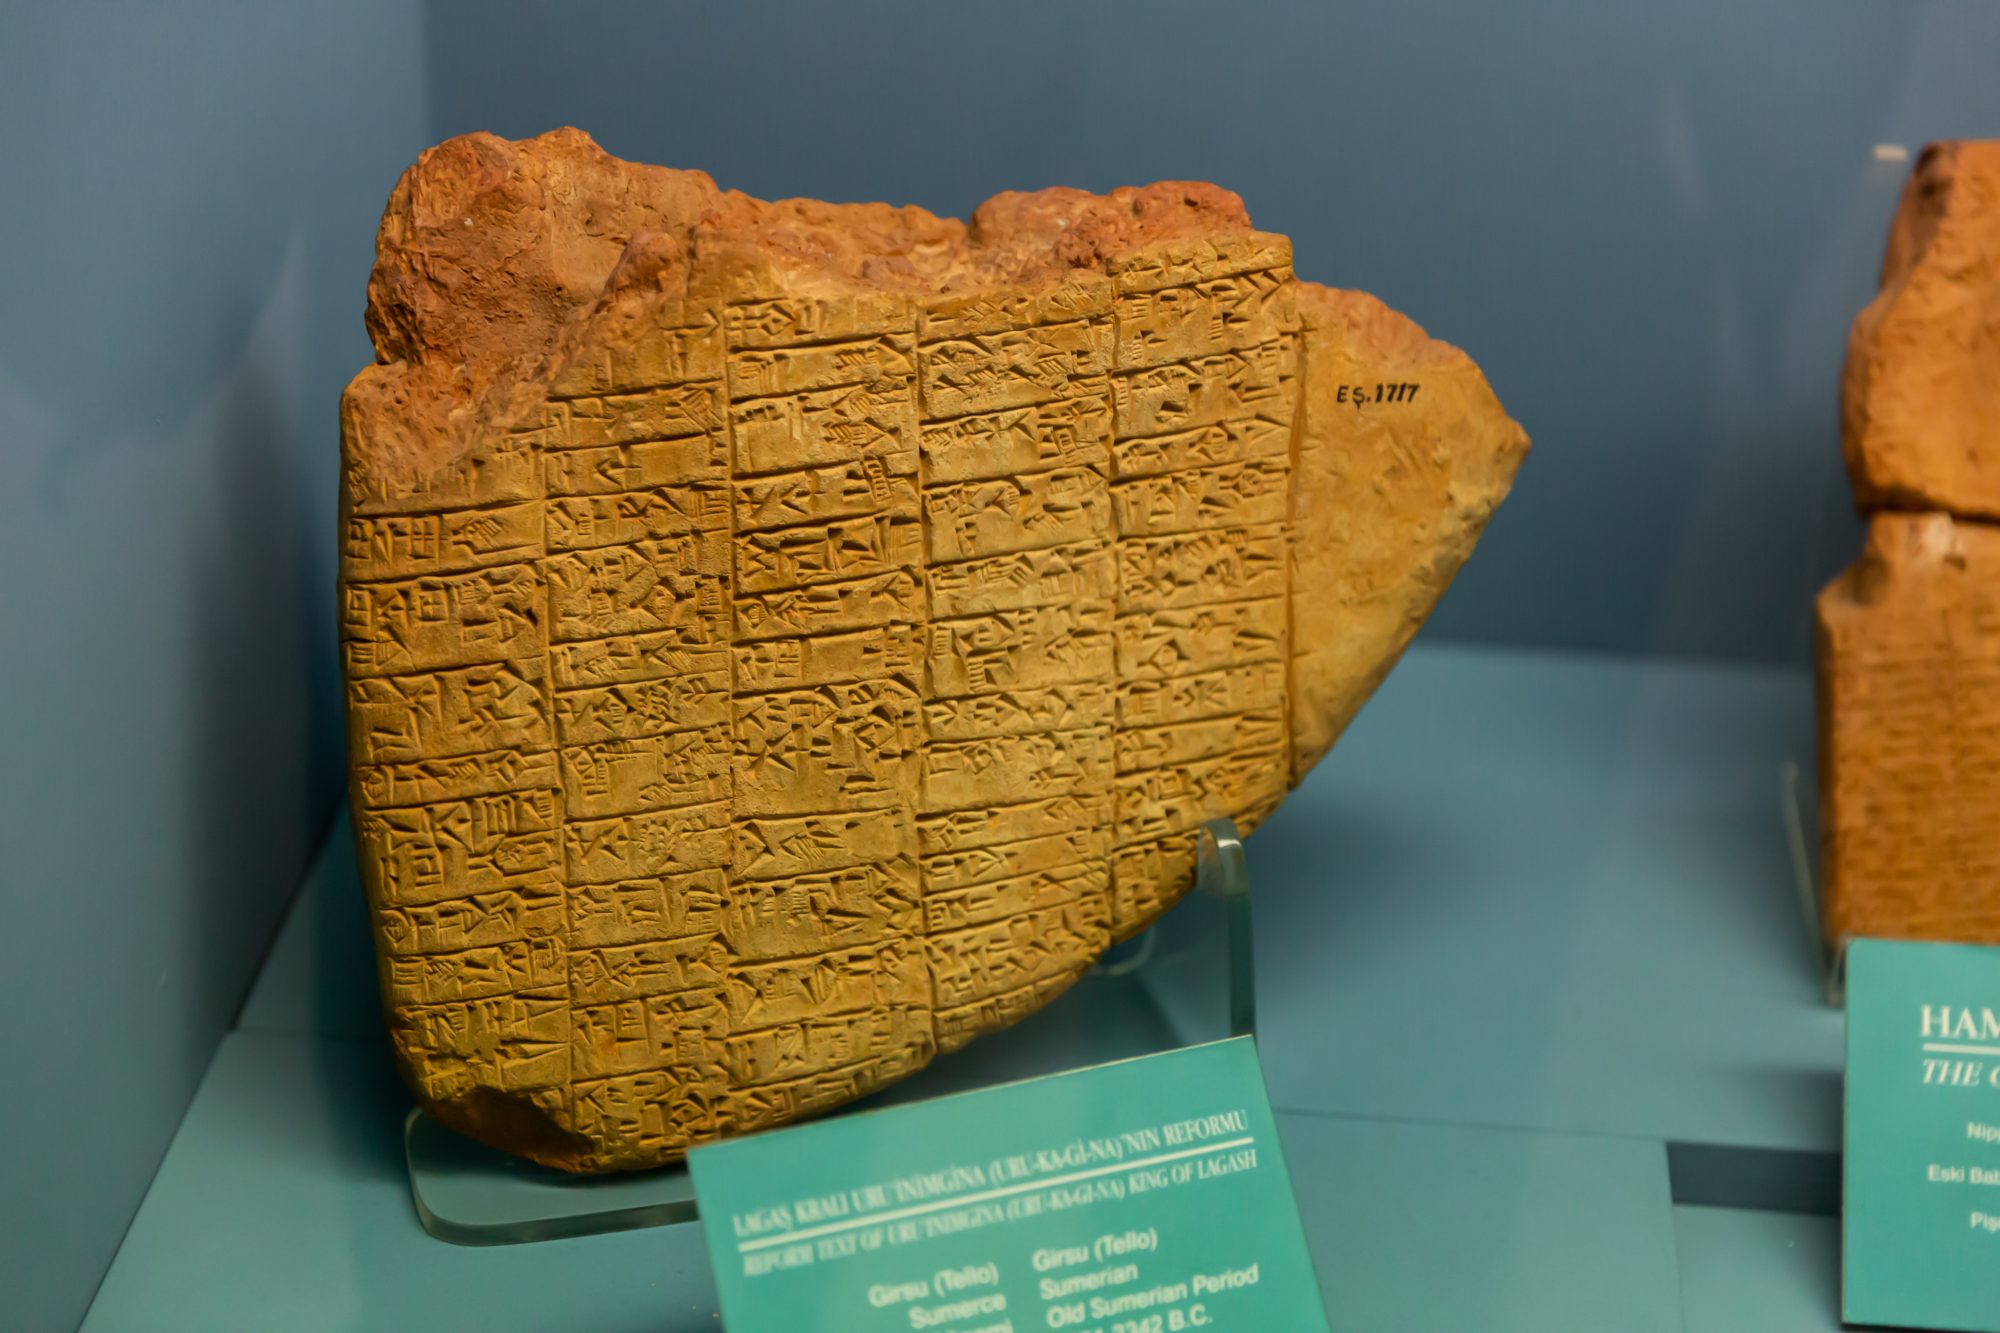 Istanbul, Turkey - January 01, 2021: Clay tablets with cuneiform writing at the ancient orient museum of the Archaeological museum in Istanbul